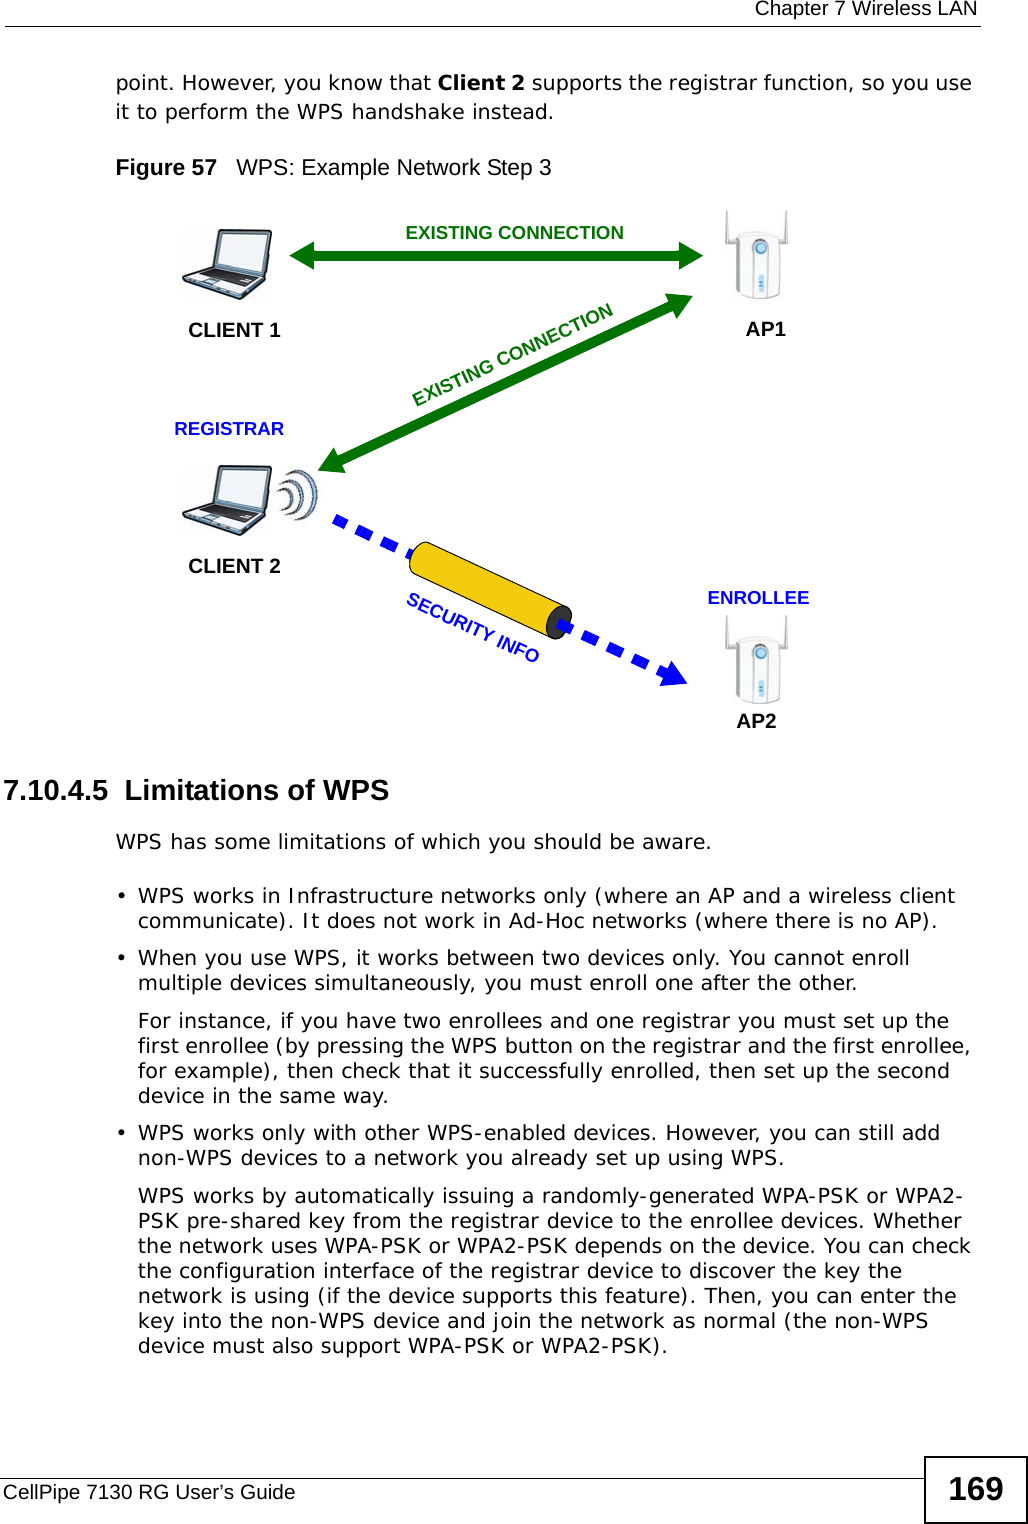  Chapter 7 Wireless LANCellPipe 7130 RG User’s Guide 169point. However, you know that Client 2 supports the registrar function, so you use it to perform the WPS handshake instead.Figure 57   WPS: Example Network Step 37.10.4.5  Limitations of WPSWPS has some limitations of which you should be aware. • WPS works in Infrastructure networks only (where an AP and a wireless client communicate). It does not work in Ad-Hoc networks (where there is no AP).• When you use WPS, it works between two devices only. You cannot enroll multiple devices simultaneously, you must enroll one after the other. For instance, if you have two enrollees and one registrar you must set up the first enrollee (by pressing the WPS button on the registrar and the first enrollee, for example), then check that it successfully enrolled, then set up the second device in the same way.• WPS works only with other WPS-enabled devices. However, you can still add non-WPS devices to a network you already set up using WPS. WPS works by automatically issuing a randomly-generated WPA-PSK or WPA2-PSK pre-shared key from the registrar device to the enrollee devices. Whether the network uses WPA-PSK or WPA2-PSK depends on the device. You can check the configuration interface of the registrar device to discover the key the network is using (if the device supports this feature). Then, you can enter the key into the non-WPS device and join the network as normal (the non-WPS device must also support WPA-PSK or WPA2-PSK).CLIENT 1 AP1REGISTRARCLIENT 2EXISTING CONNECTIONSECURITY INFOENROLLEEAP2EXISTING CONNECTION